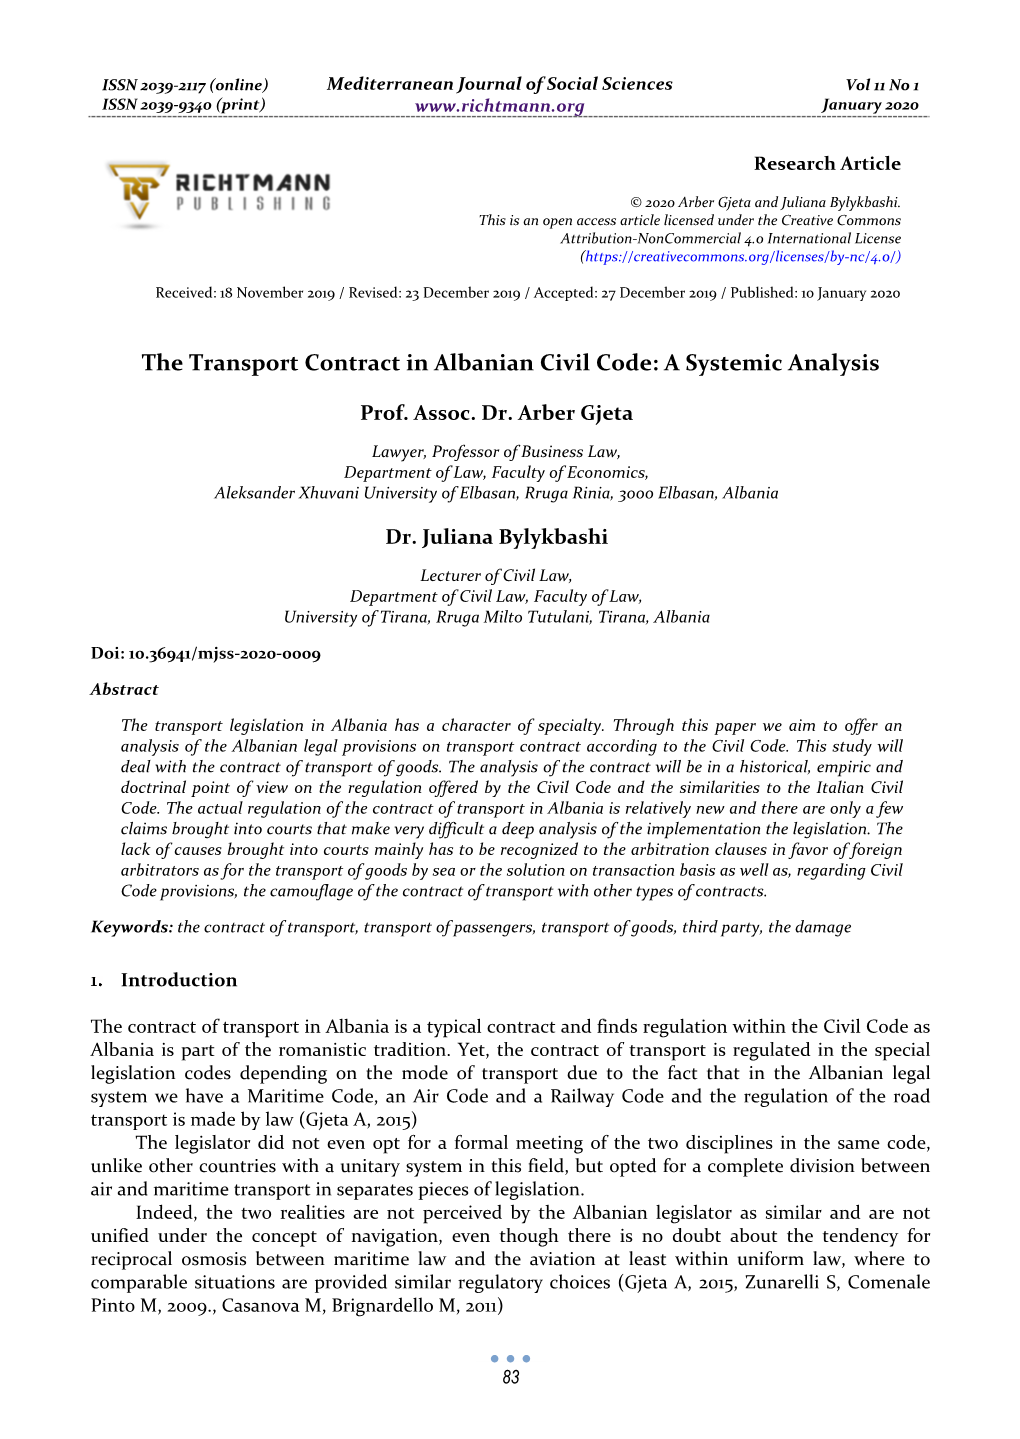 The Transport Contract in Albanian Civil Code: a Systemic Analysis